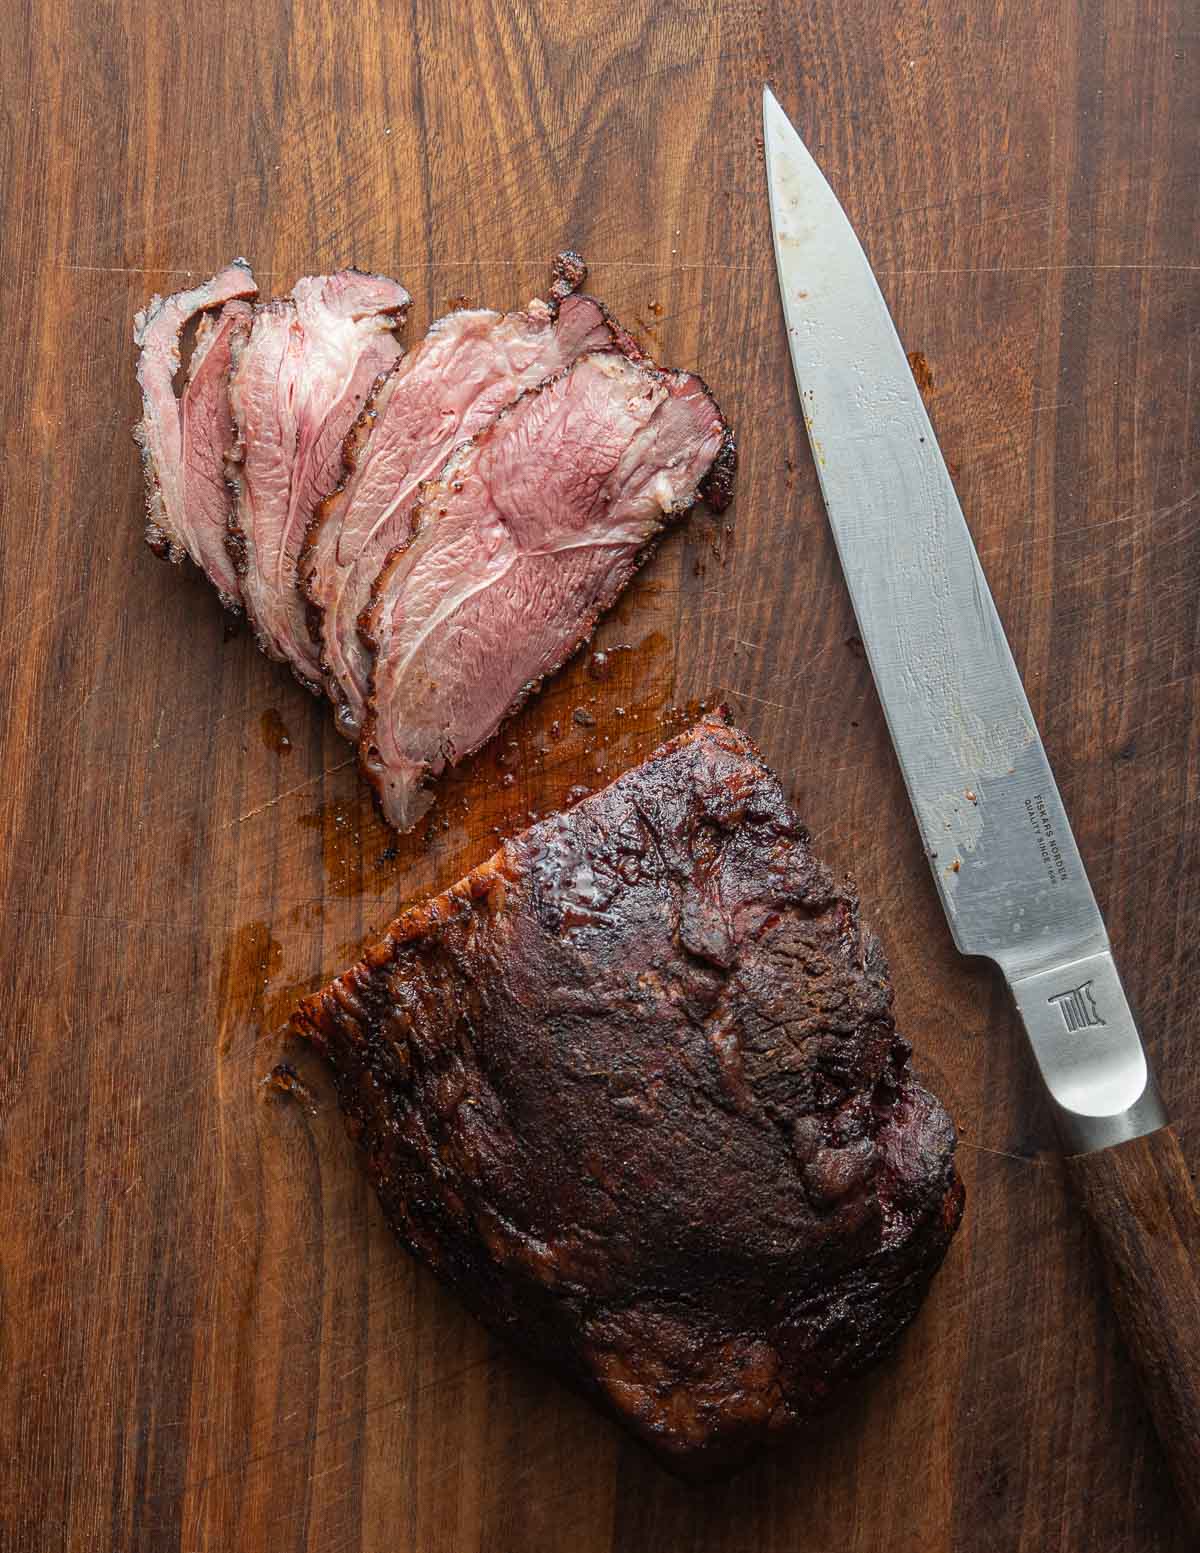 A pink or medium temperature smoked lamb leg sliced with a long knife on a black walnut cutting board.